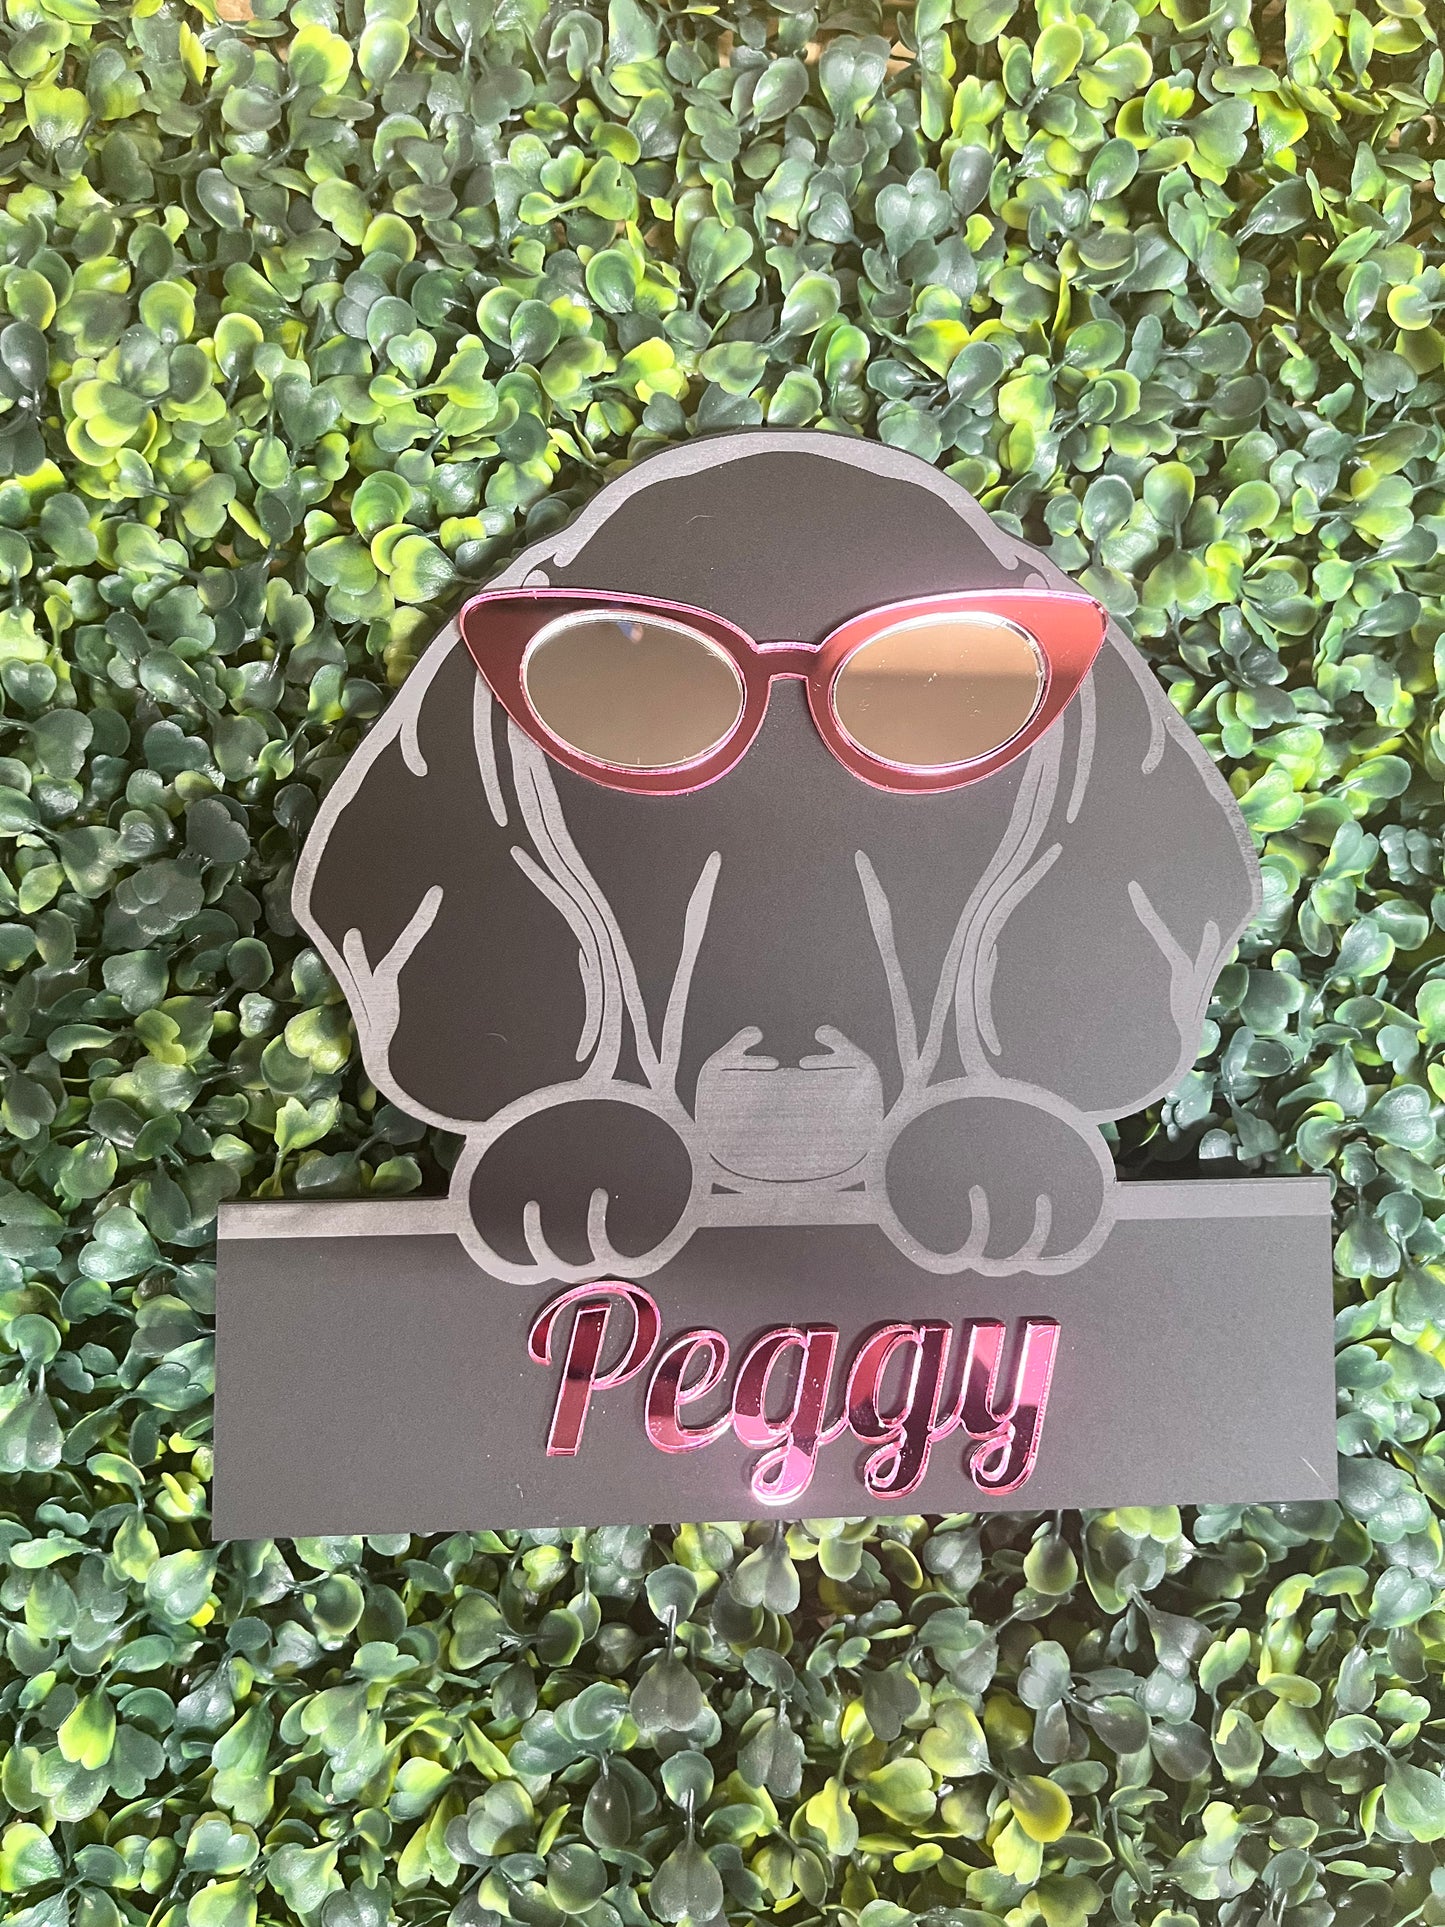 Pimp up your Pooch - Wall Art - Signage